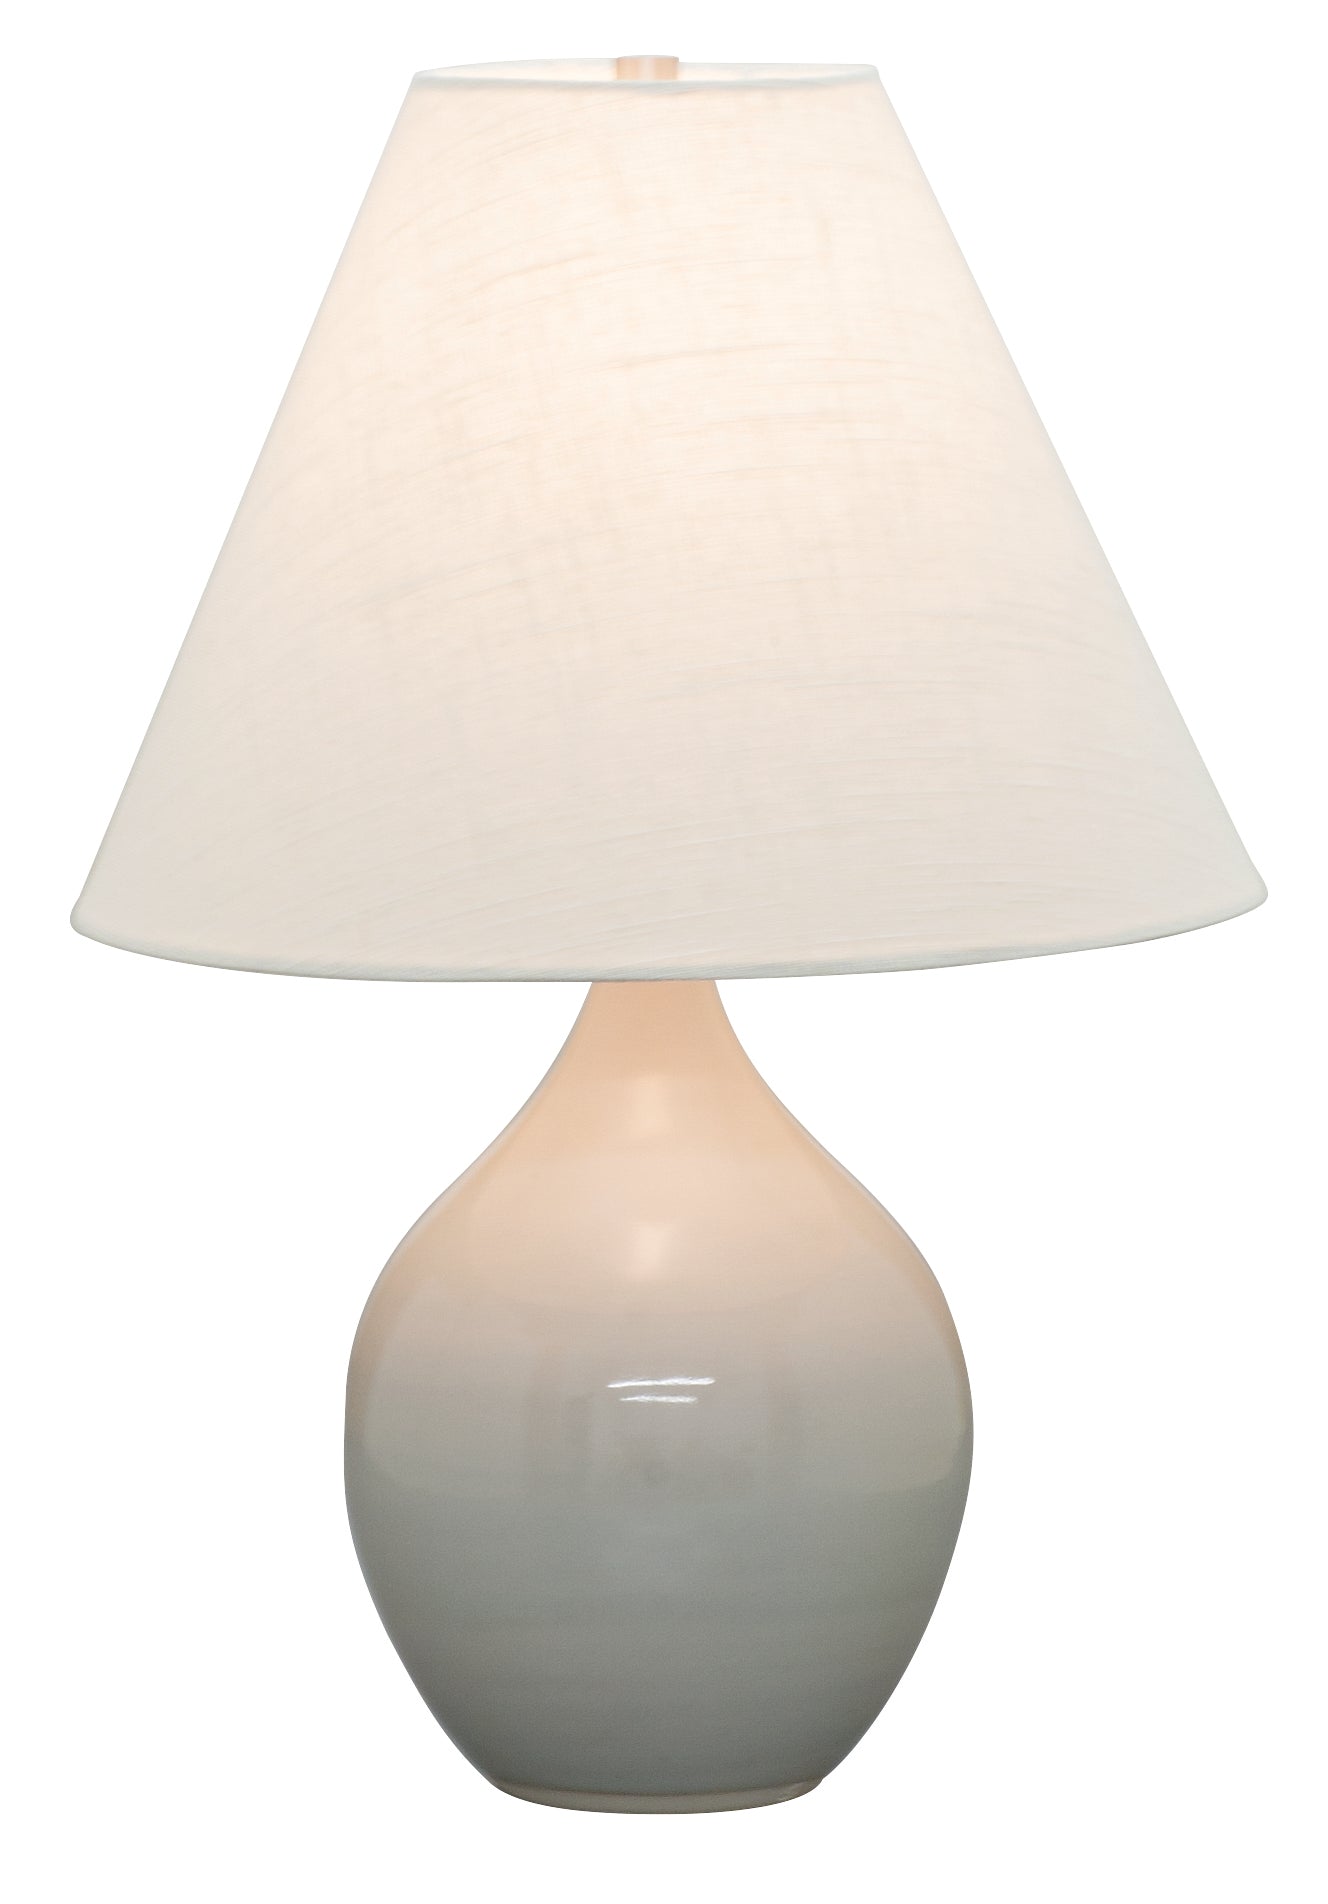 House of Troy Scatchard 19" Stoneware Accent Lamp in Gray Gloss GS200-GG